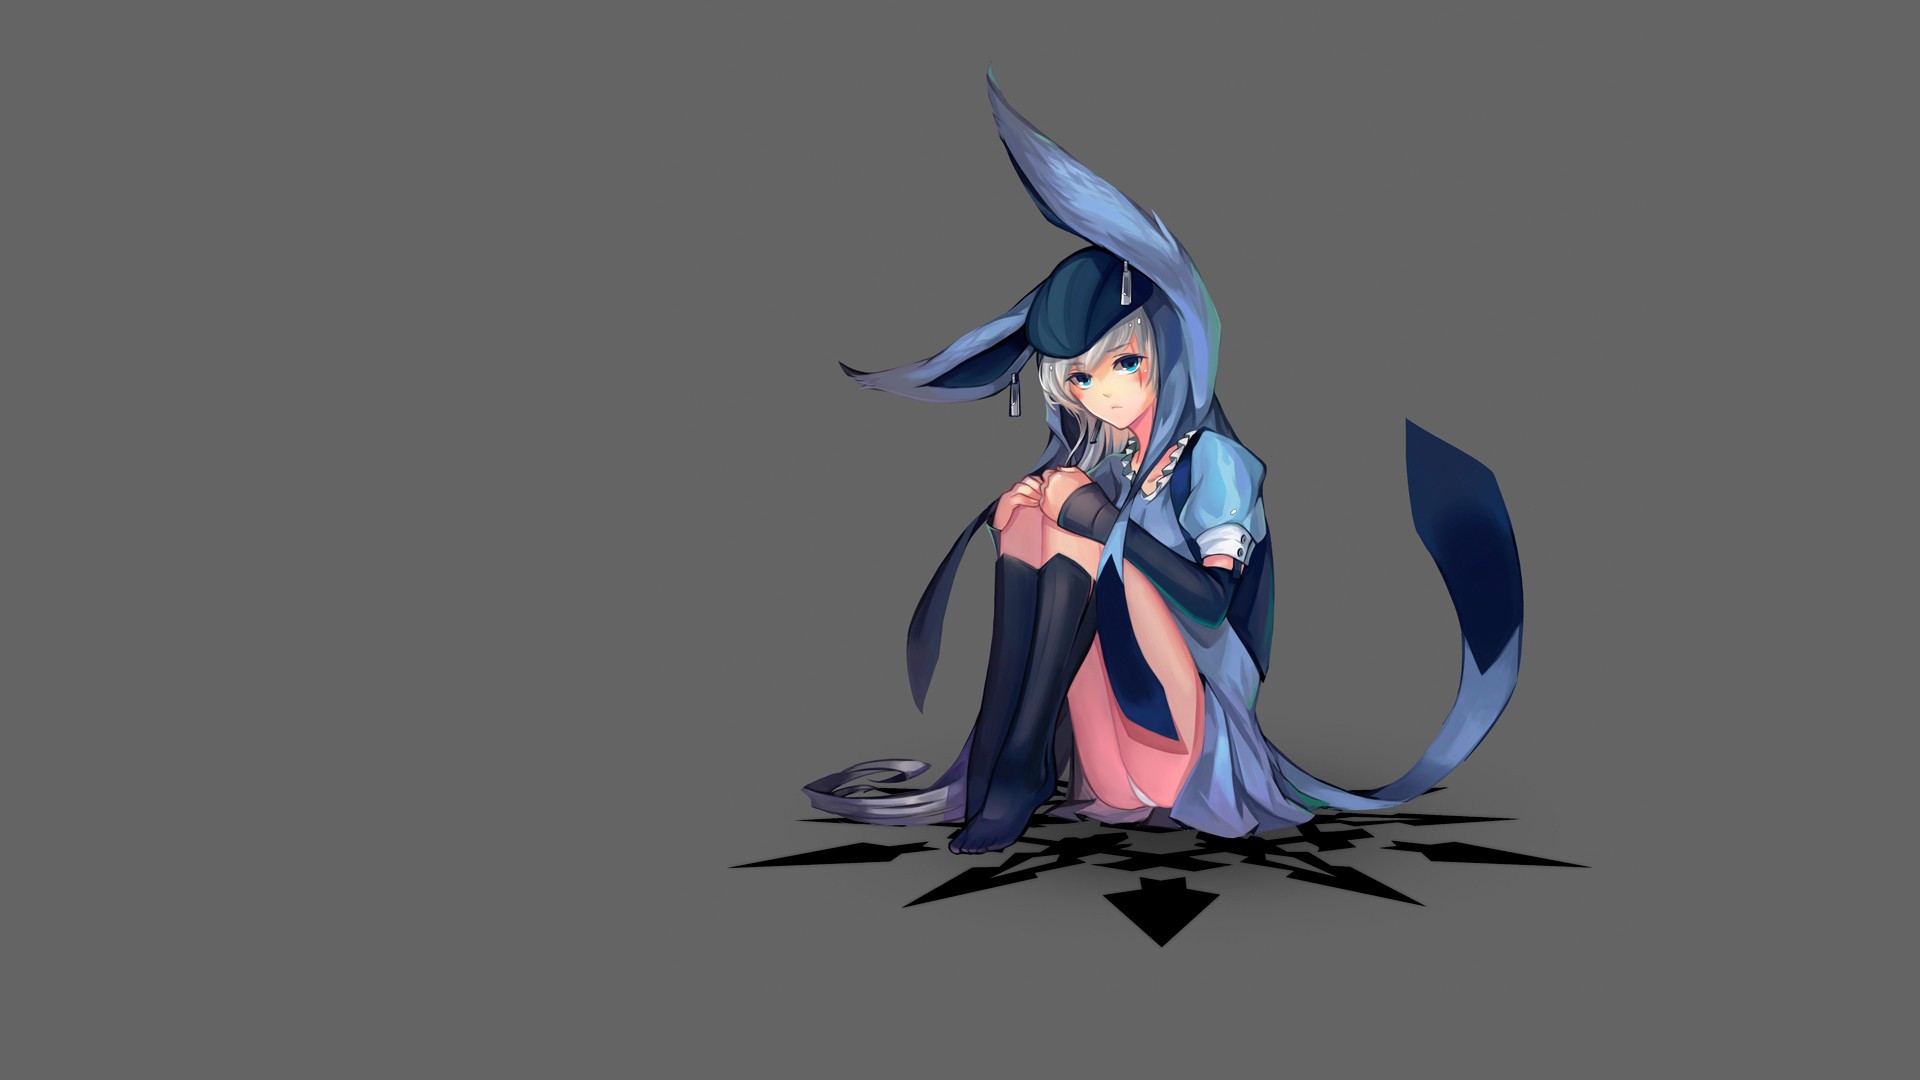 Anime 1920x1080 anime anime girls Pokémon Glaceon Weiss Schnee gray background sitting simple background